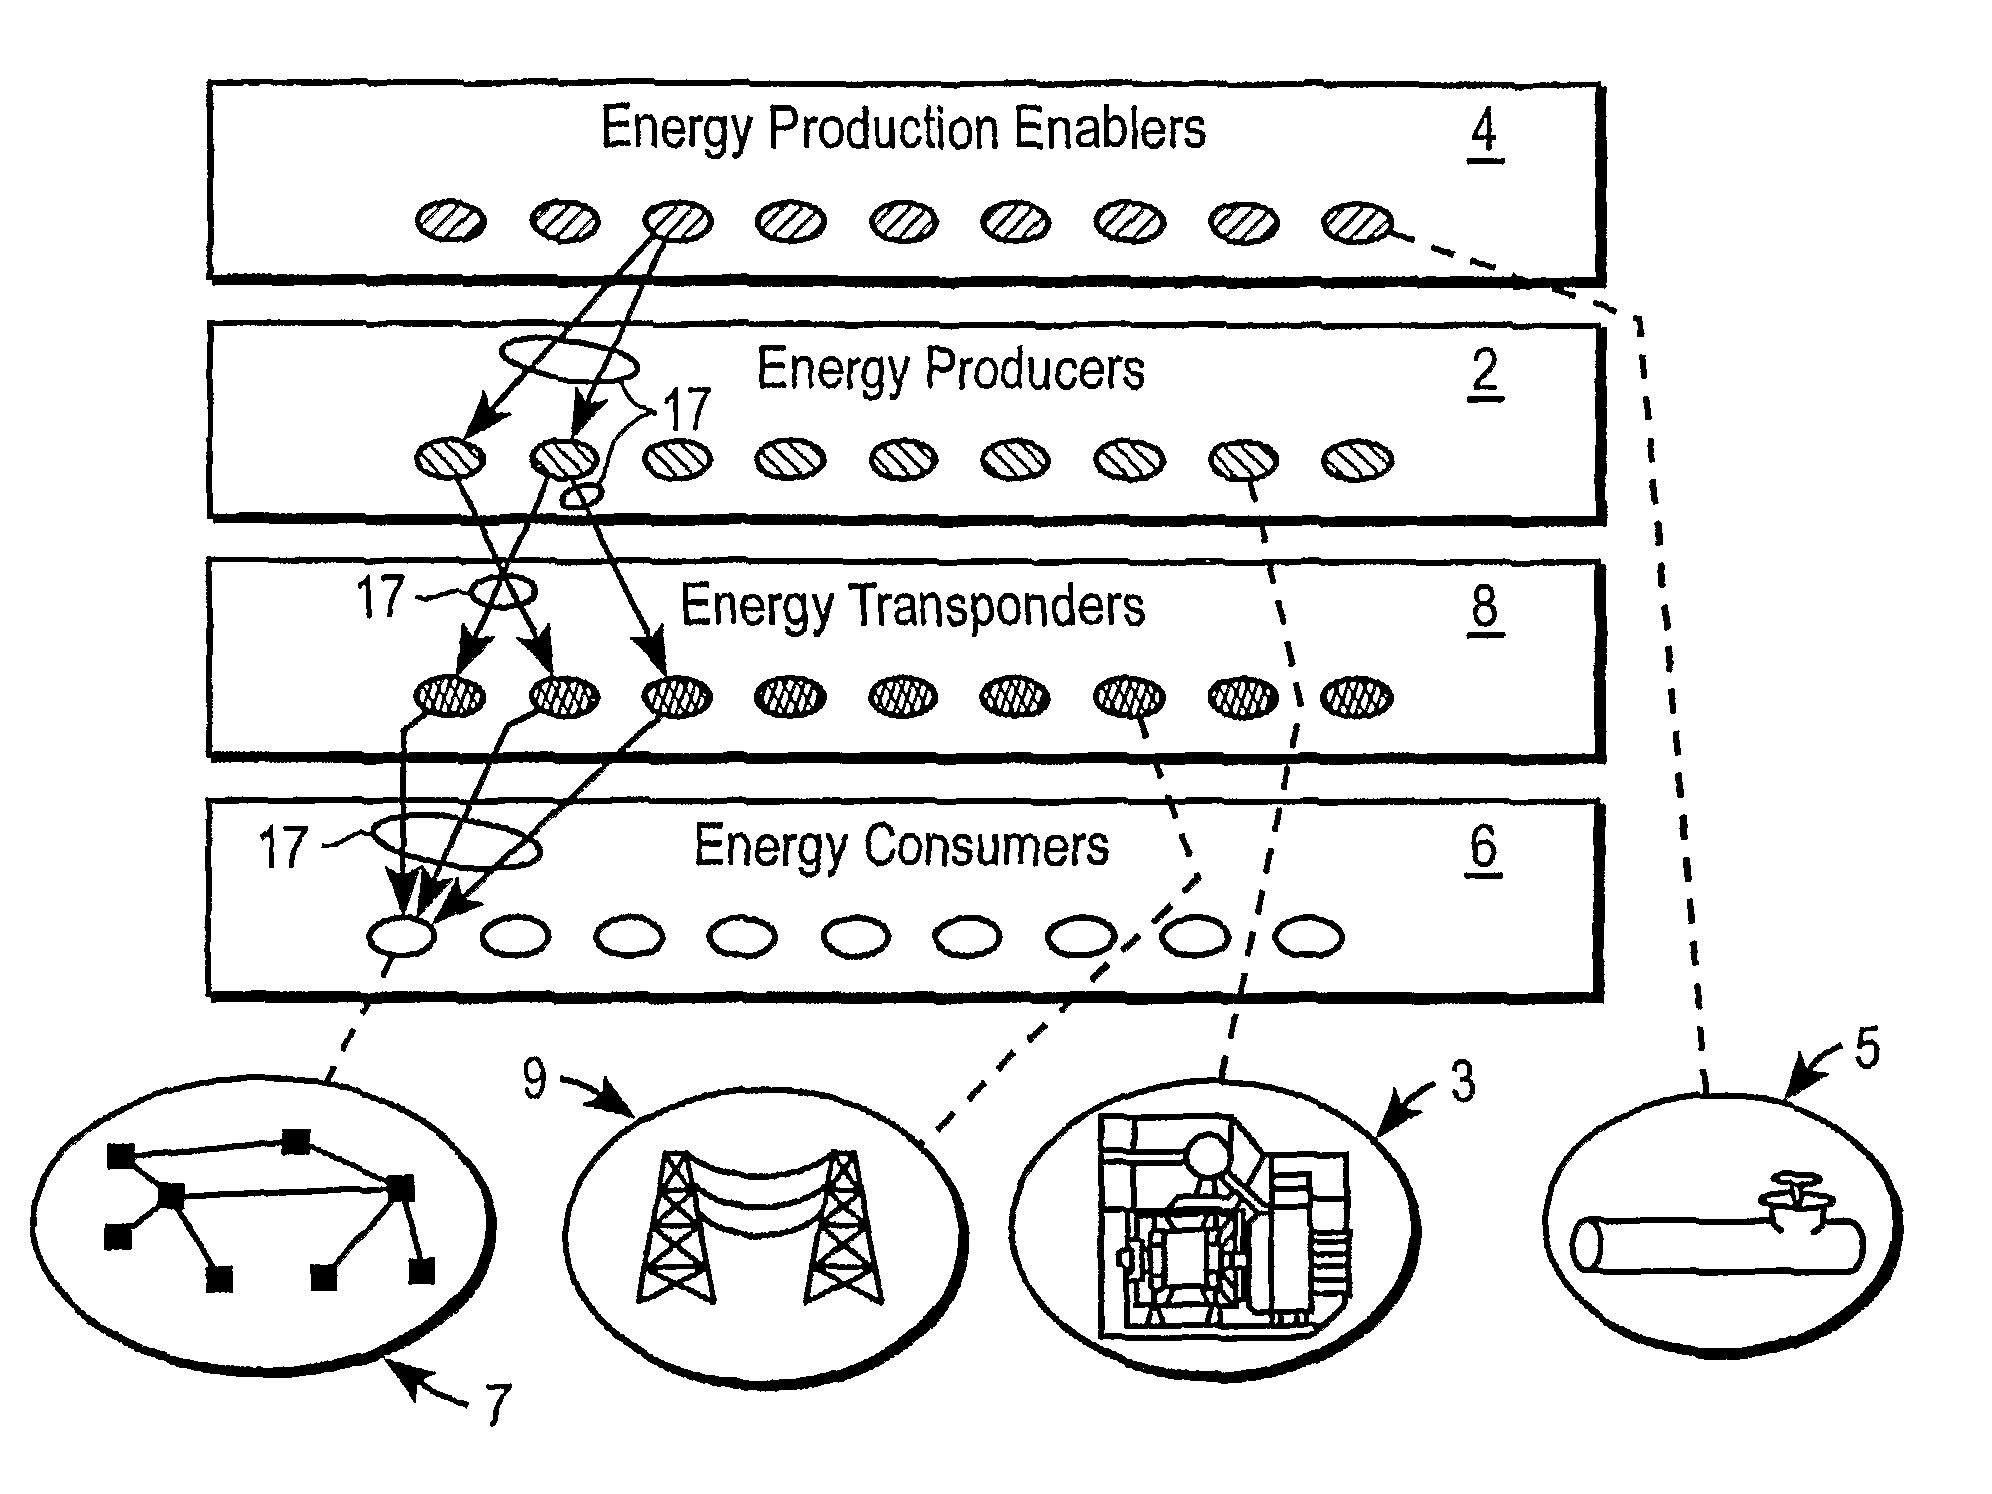 Systems and methods for modifying power usage